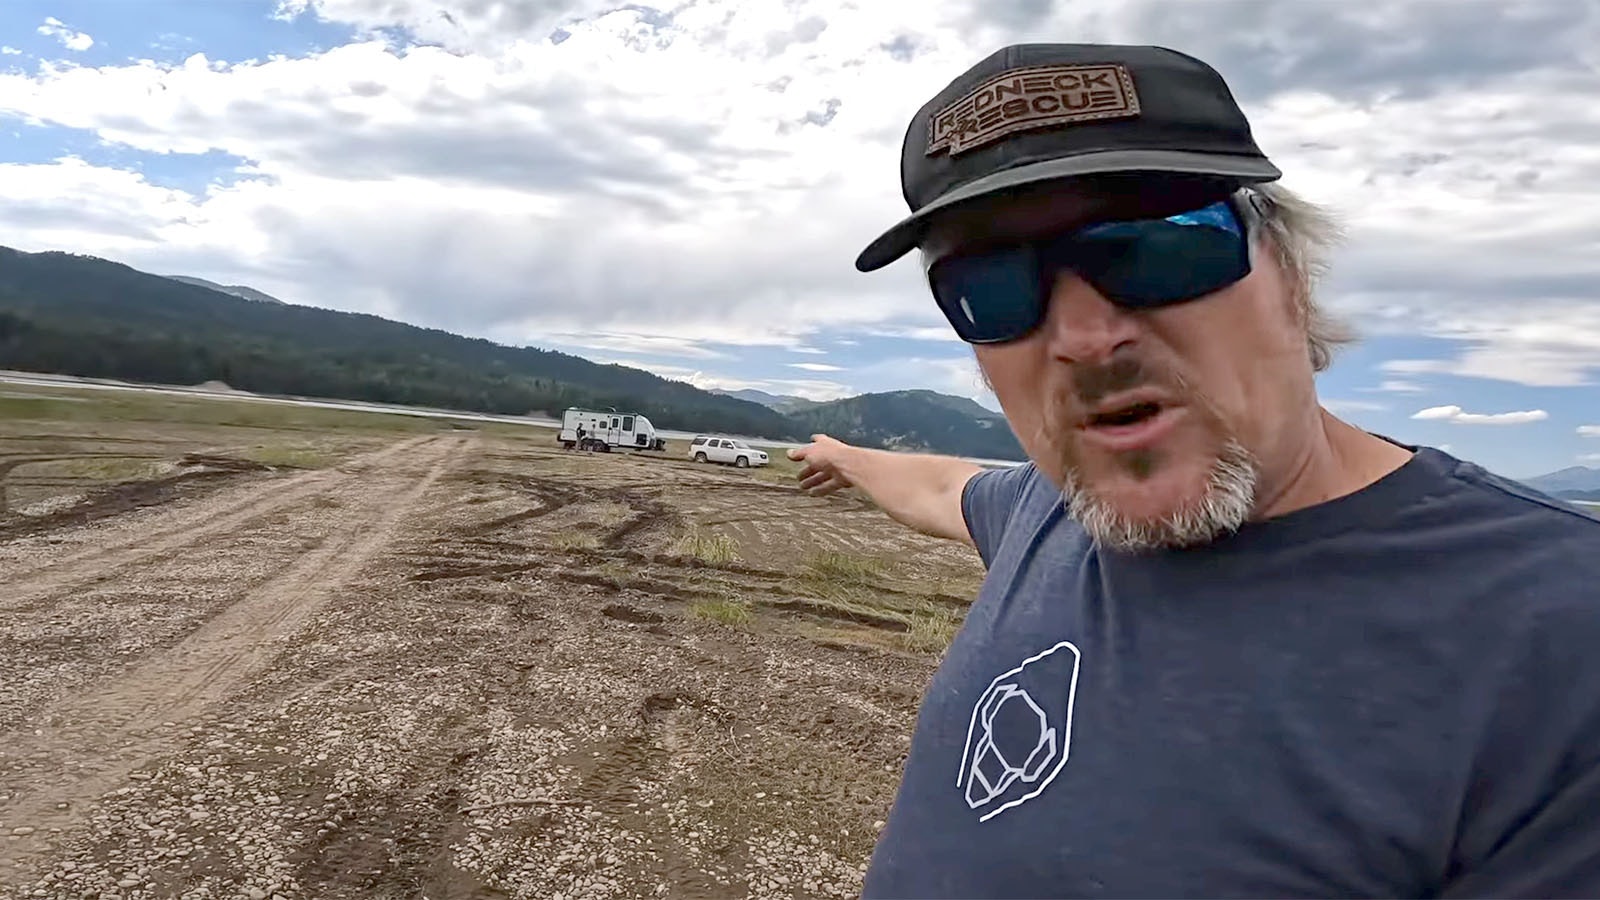 Redneck Rescue owner Nick Cummings has a growing YouTube channel featuring some of his gnarliest rescues from remote areas around Wyoming, like this vehicle and trailer stuck at Palisades Reservoir.